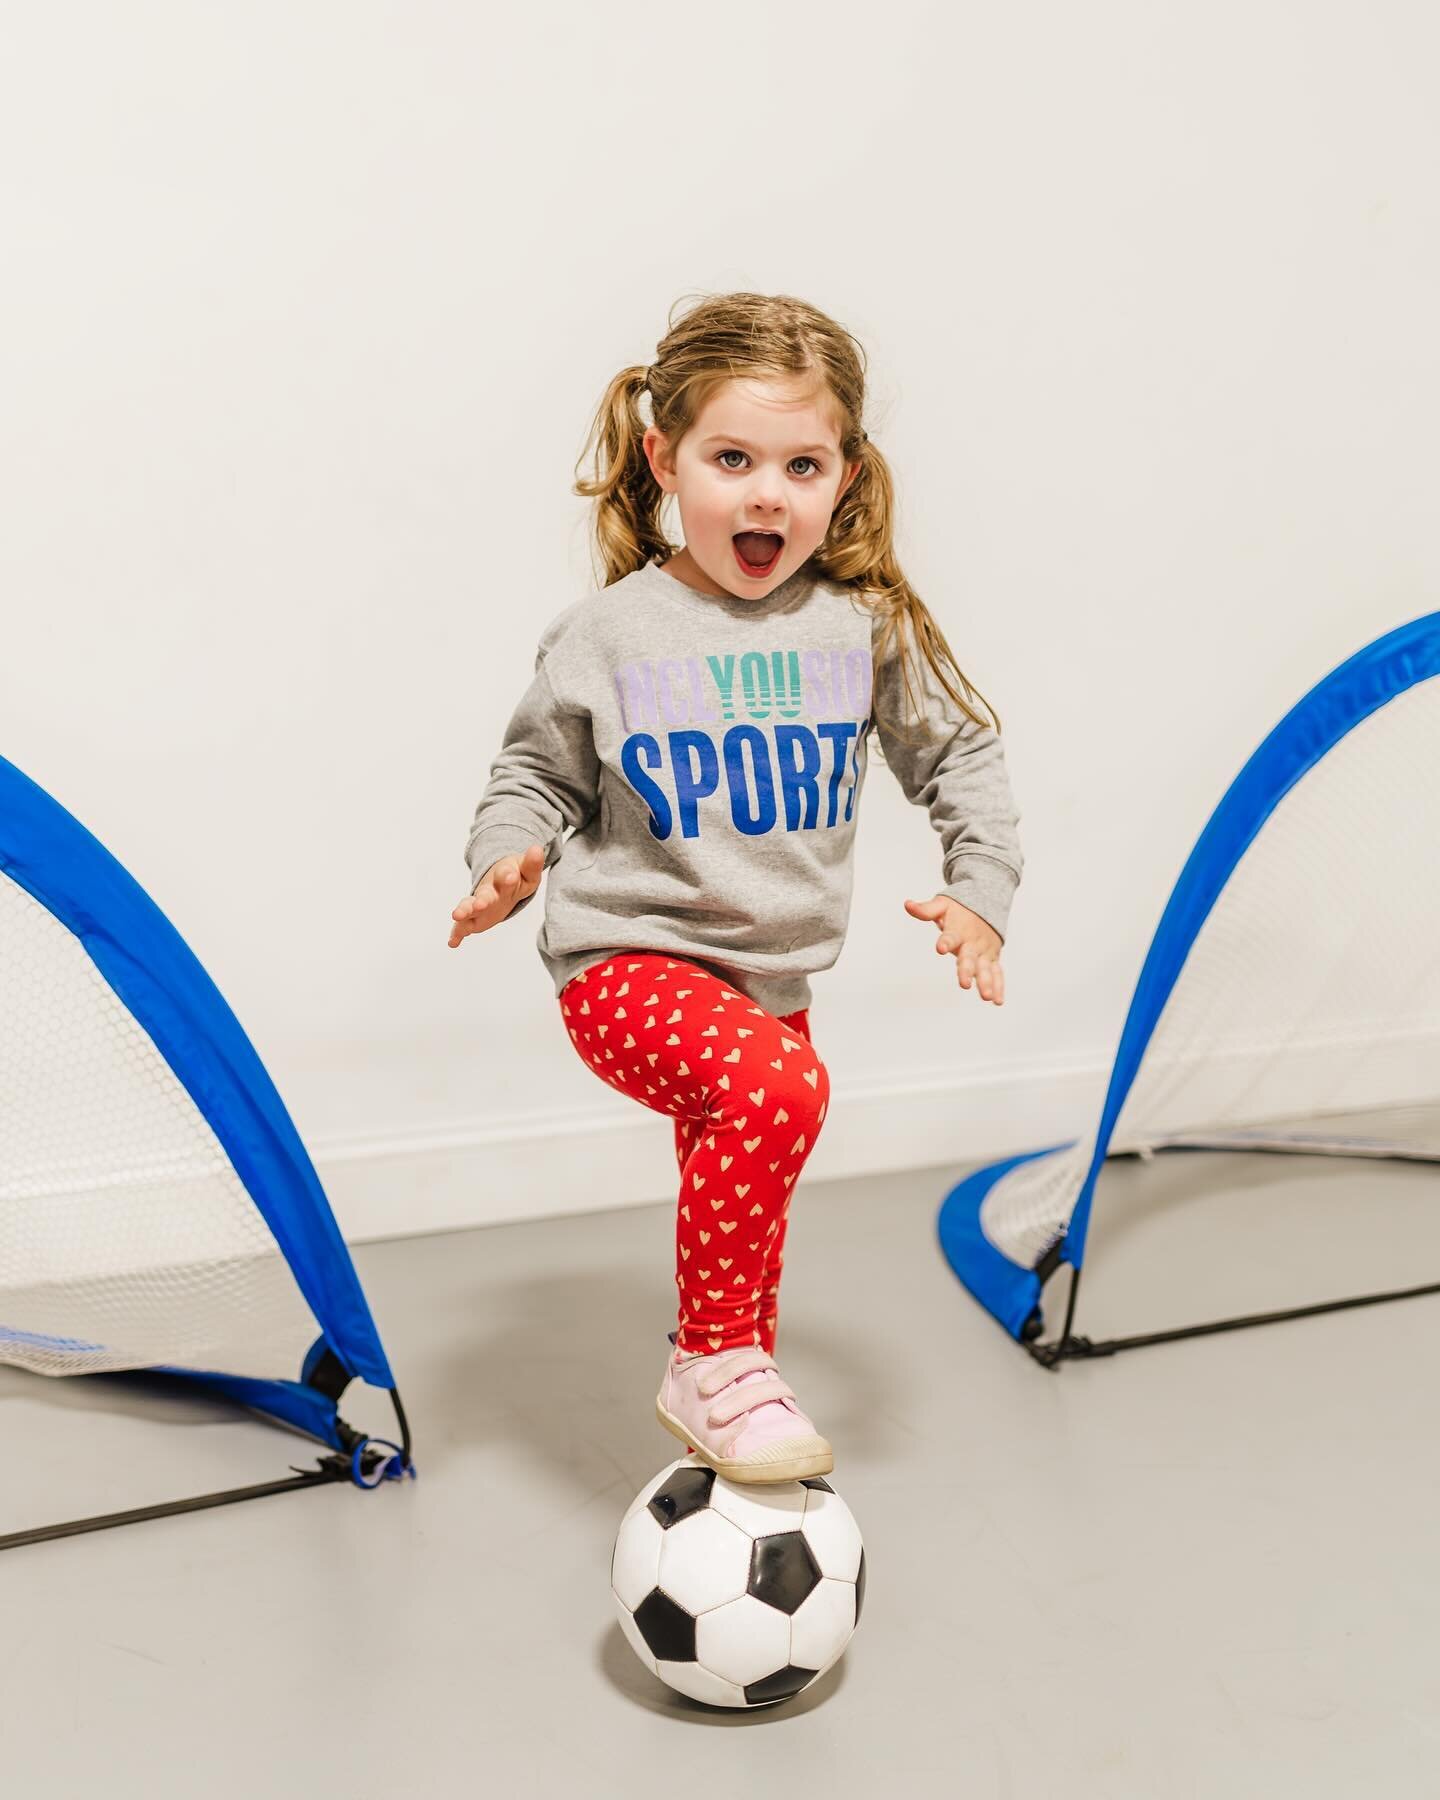 Starting this Sunday, join us for soccer classes in partnership with @westwoodrec !

Perfect for beginners who are looking for a fun way to play and make new friends this winter.

Everything you need to know 👇 
Ages: 2-5
Cost: $130 (residents), $140